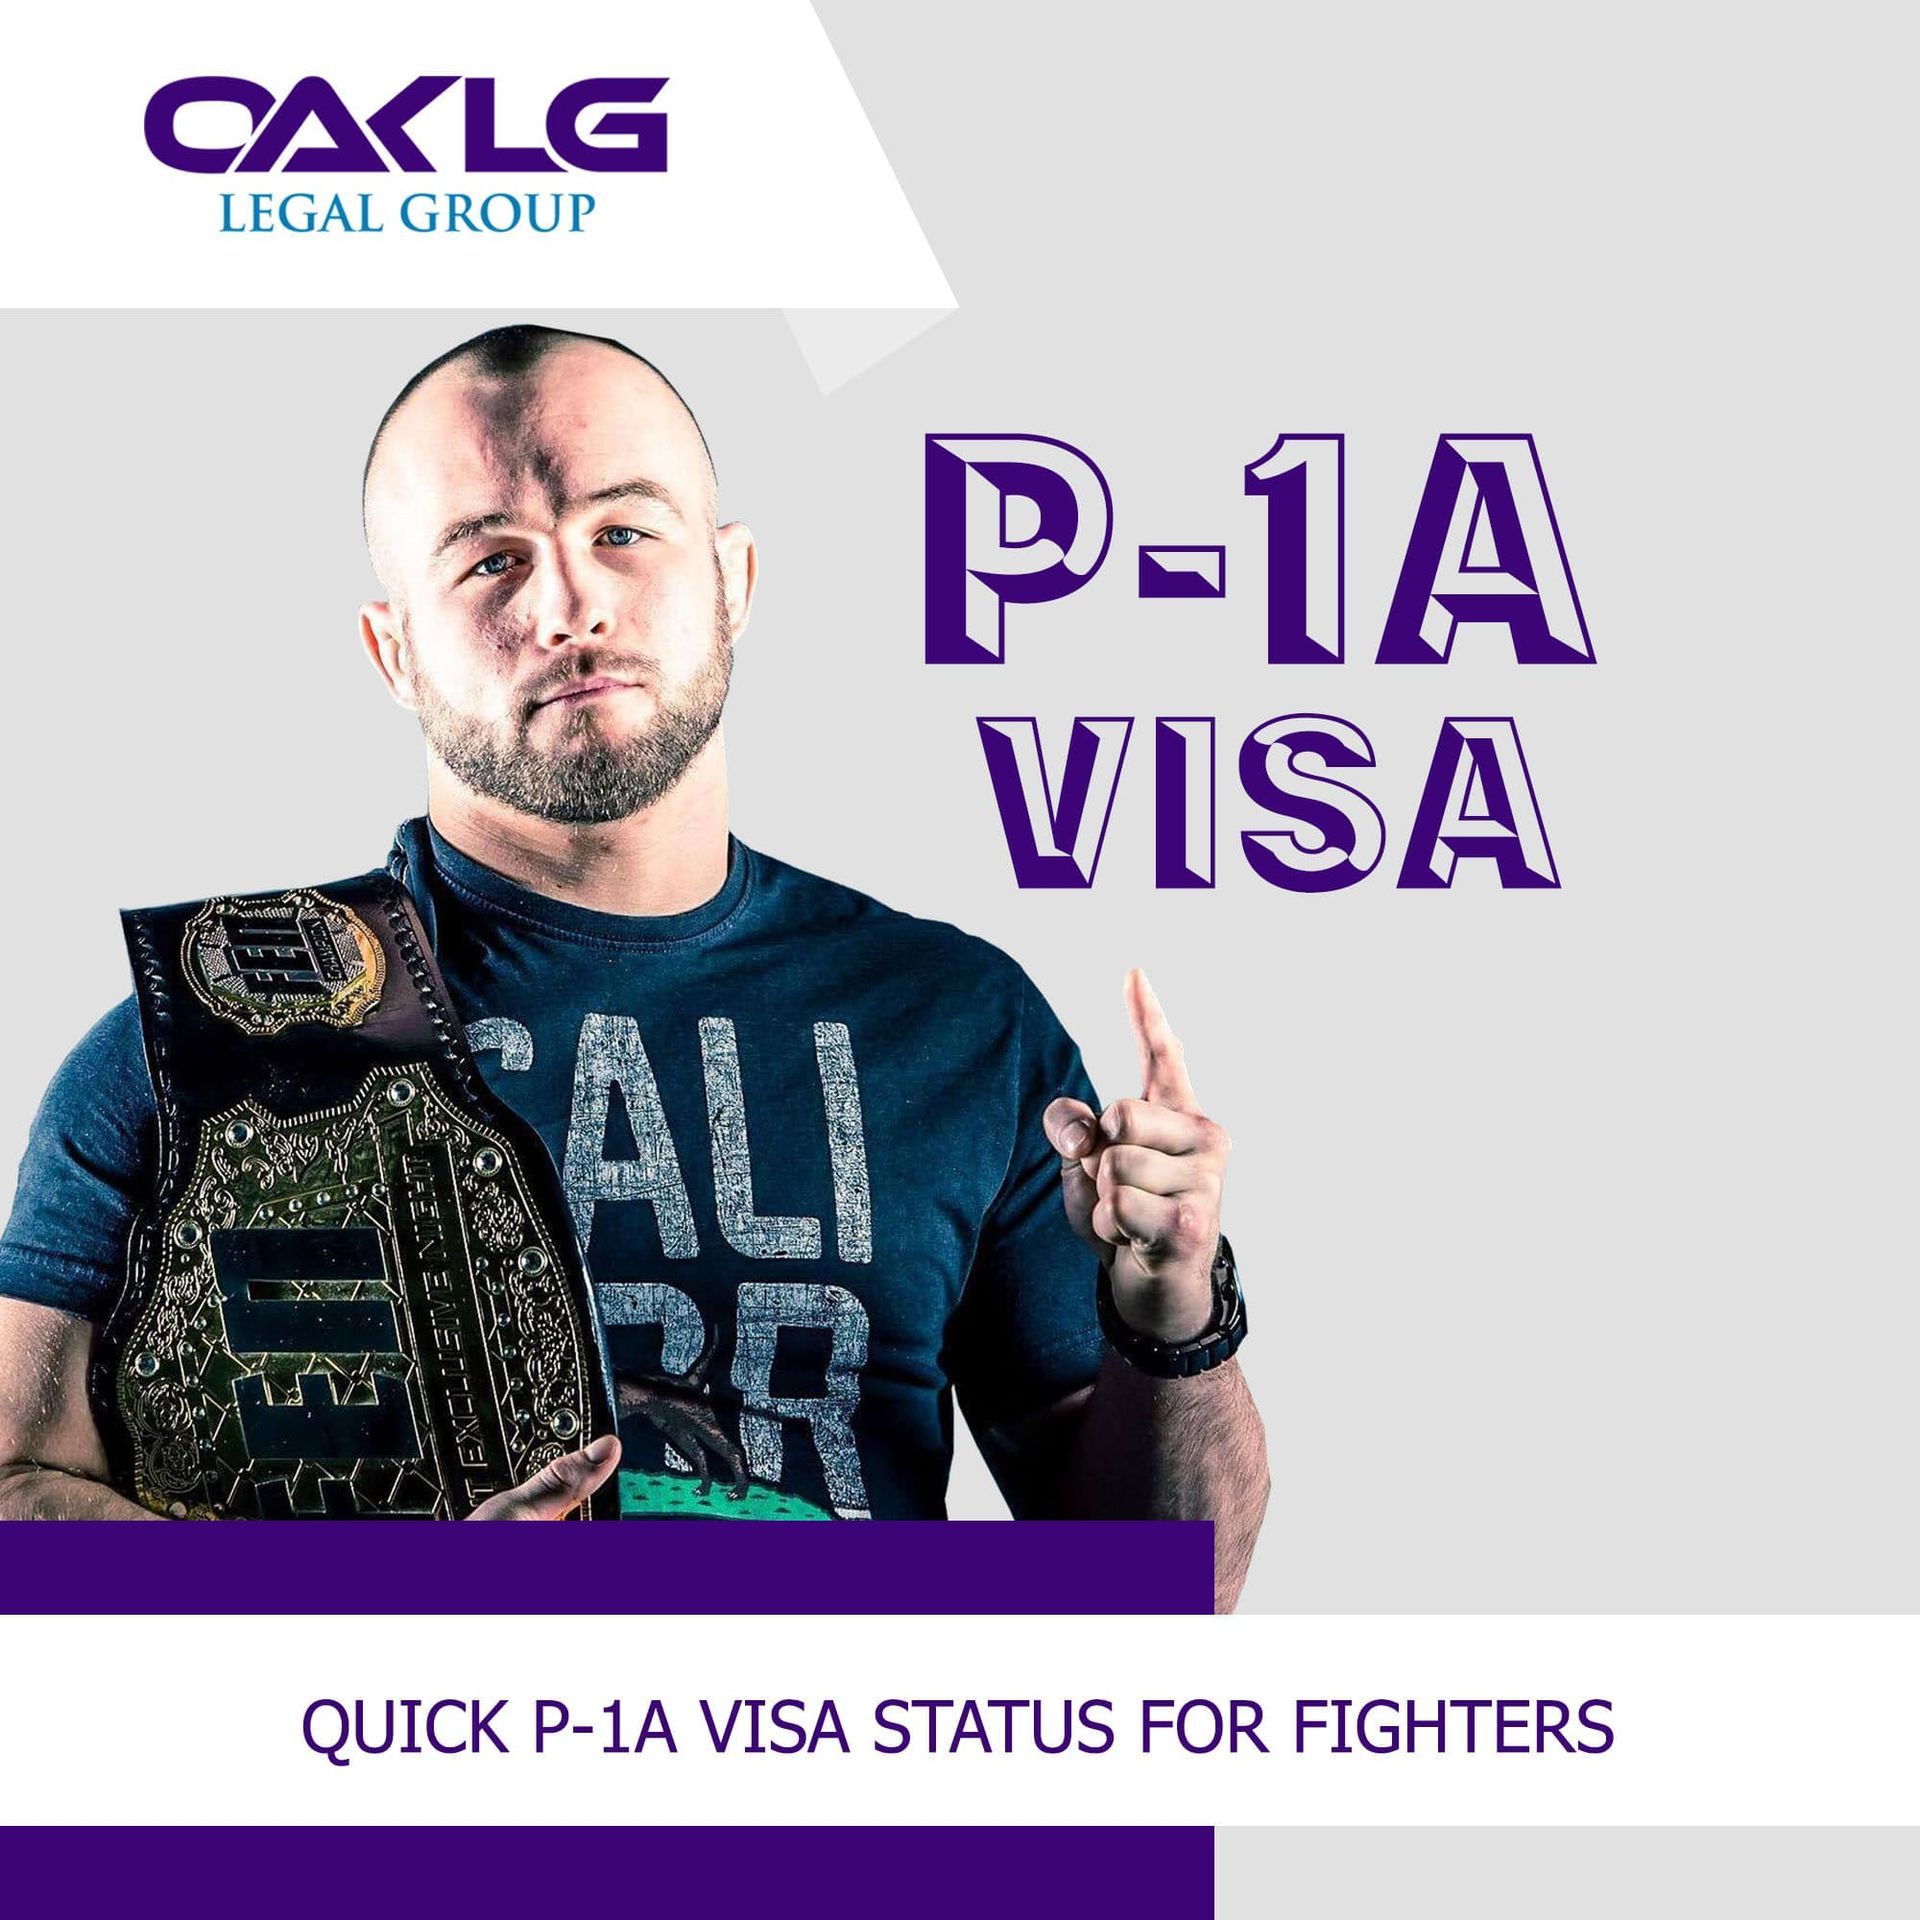 P-1A visa for fighters in the U.S.